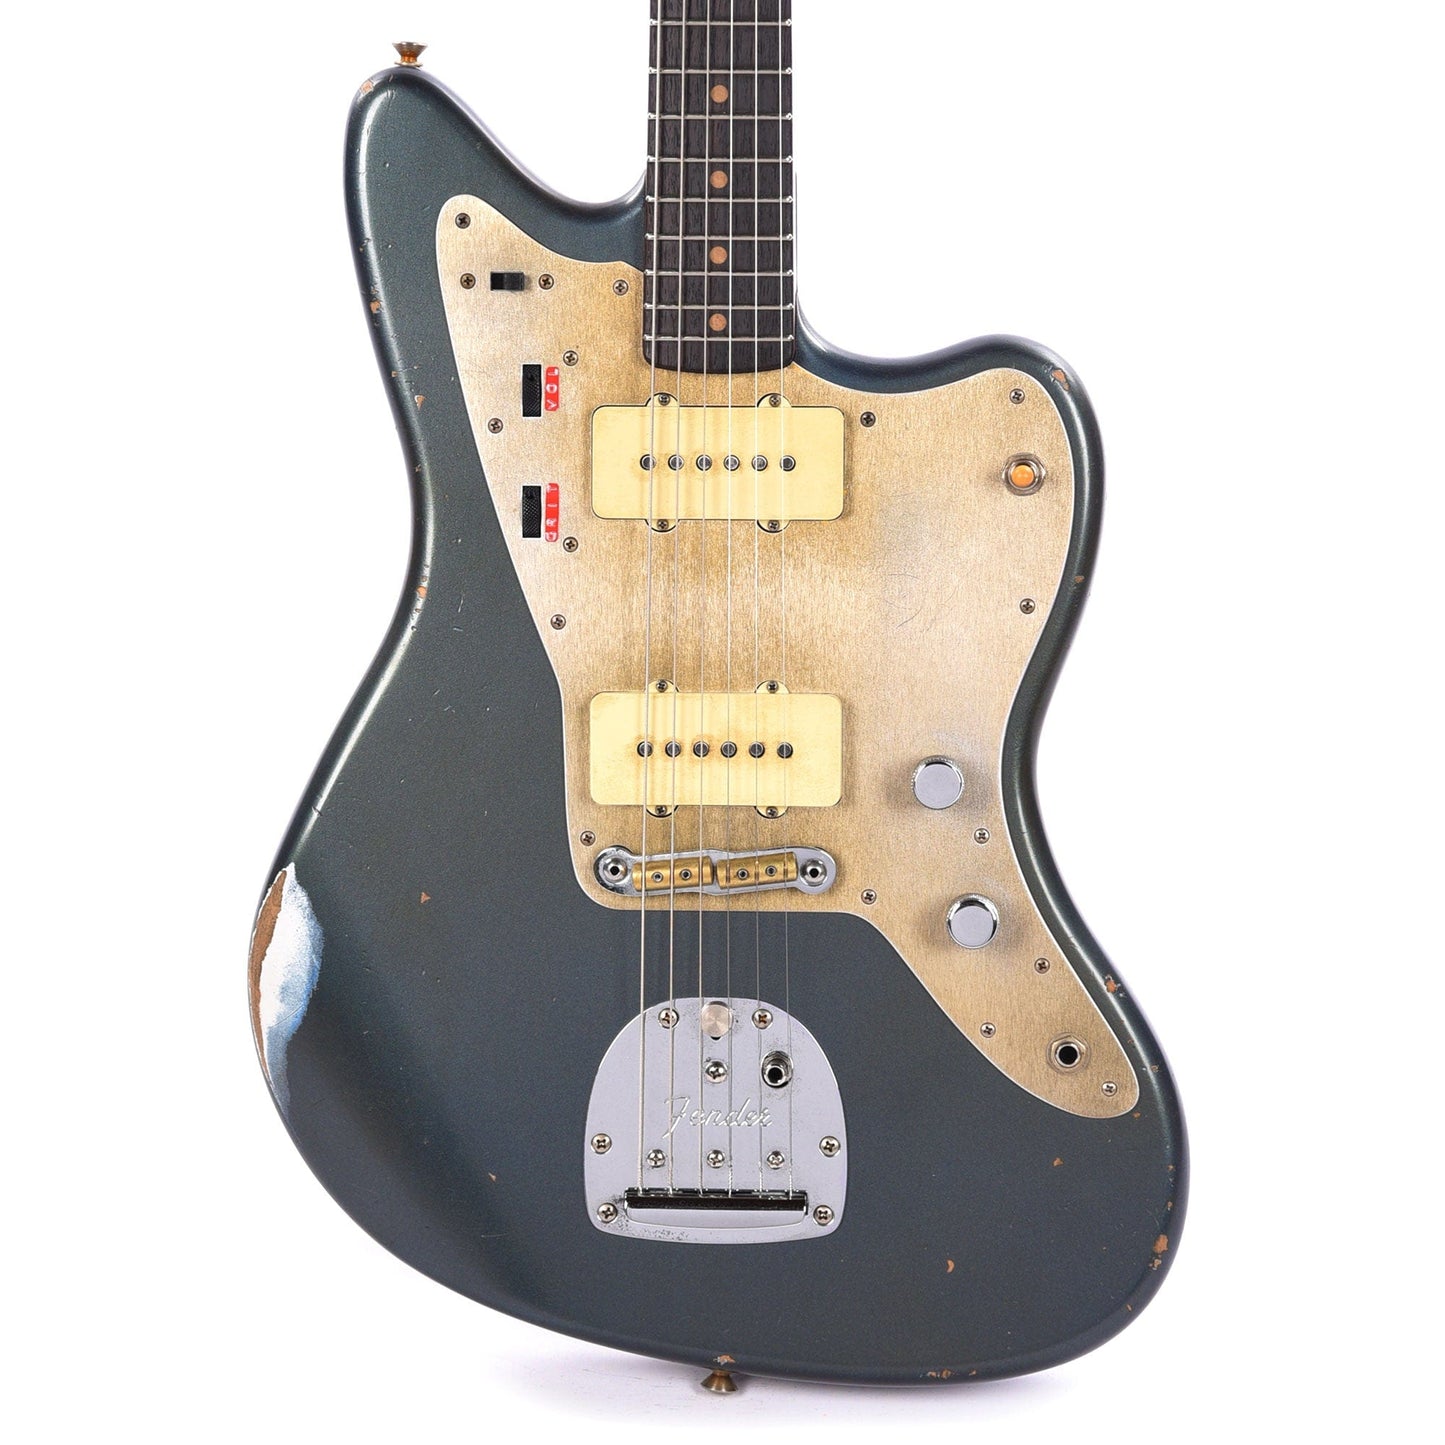 Fender Custom Shop 1959 Jazzmaster "Chicago Special" Deluxe Closet Classic Super Aged Charcoal Frost Metallic Masterbuilt by Levi Perry Electric Guitars / Solid Body